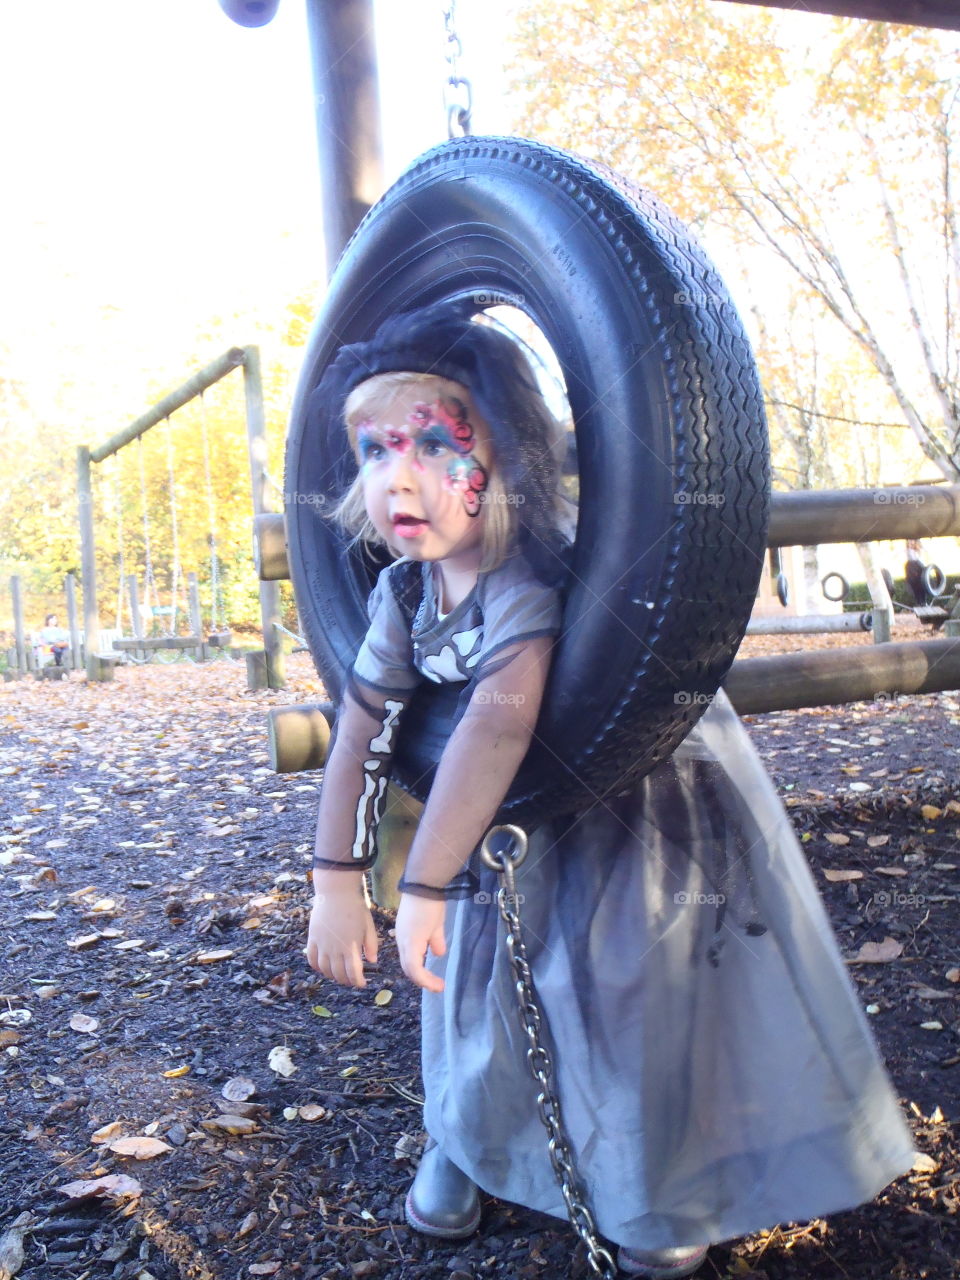 Little girl on tire swing with face paint